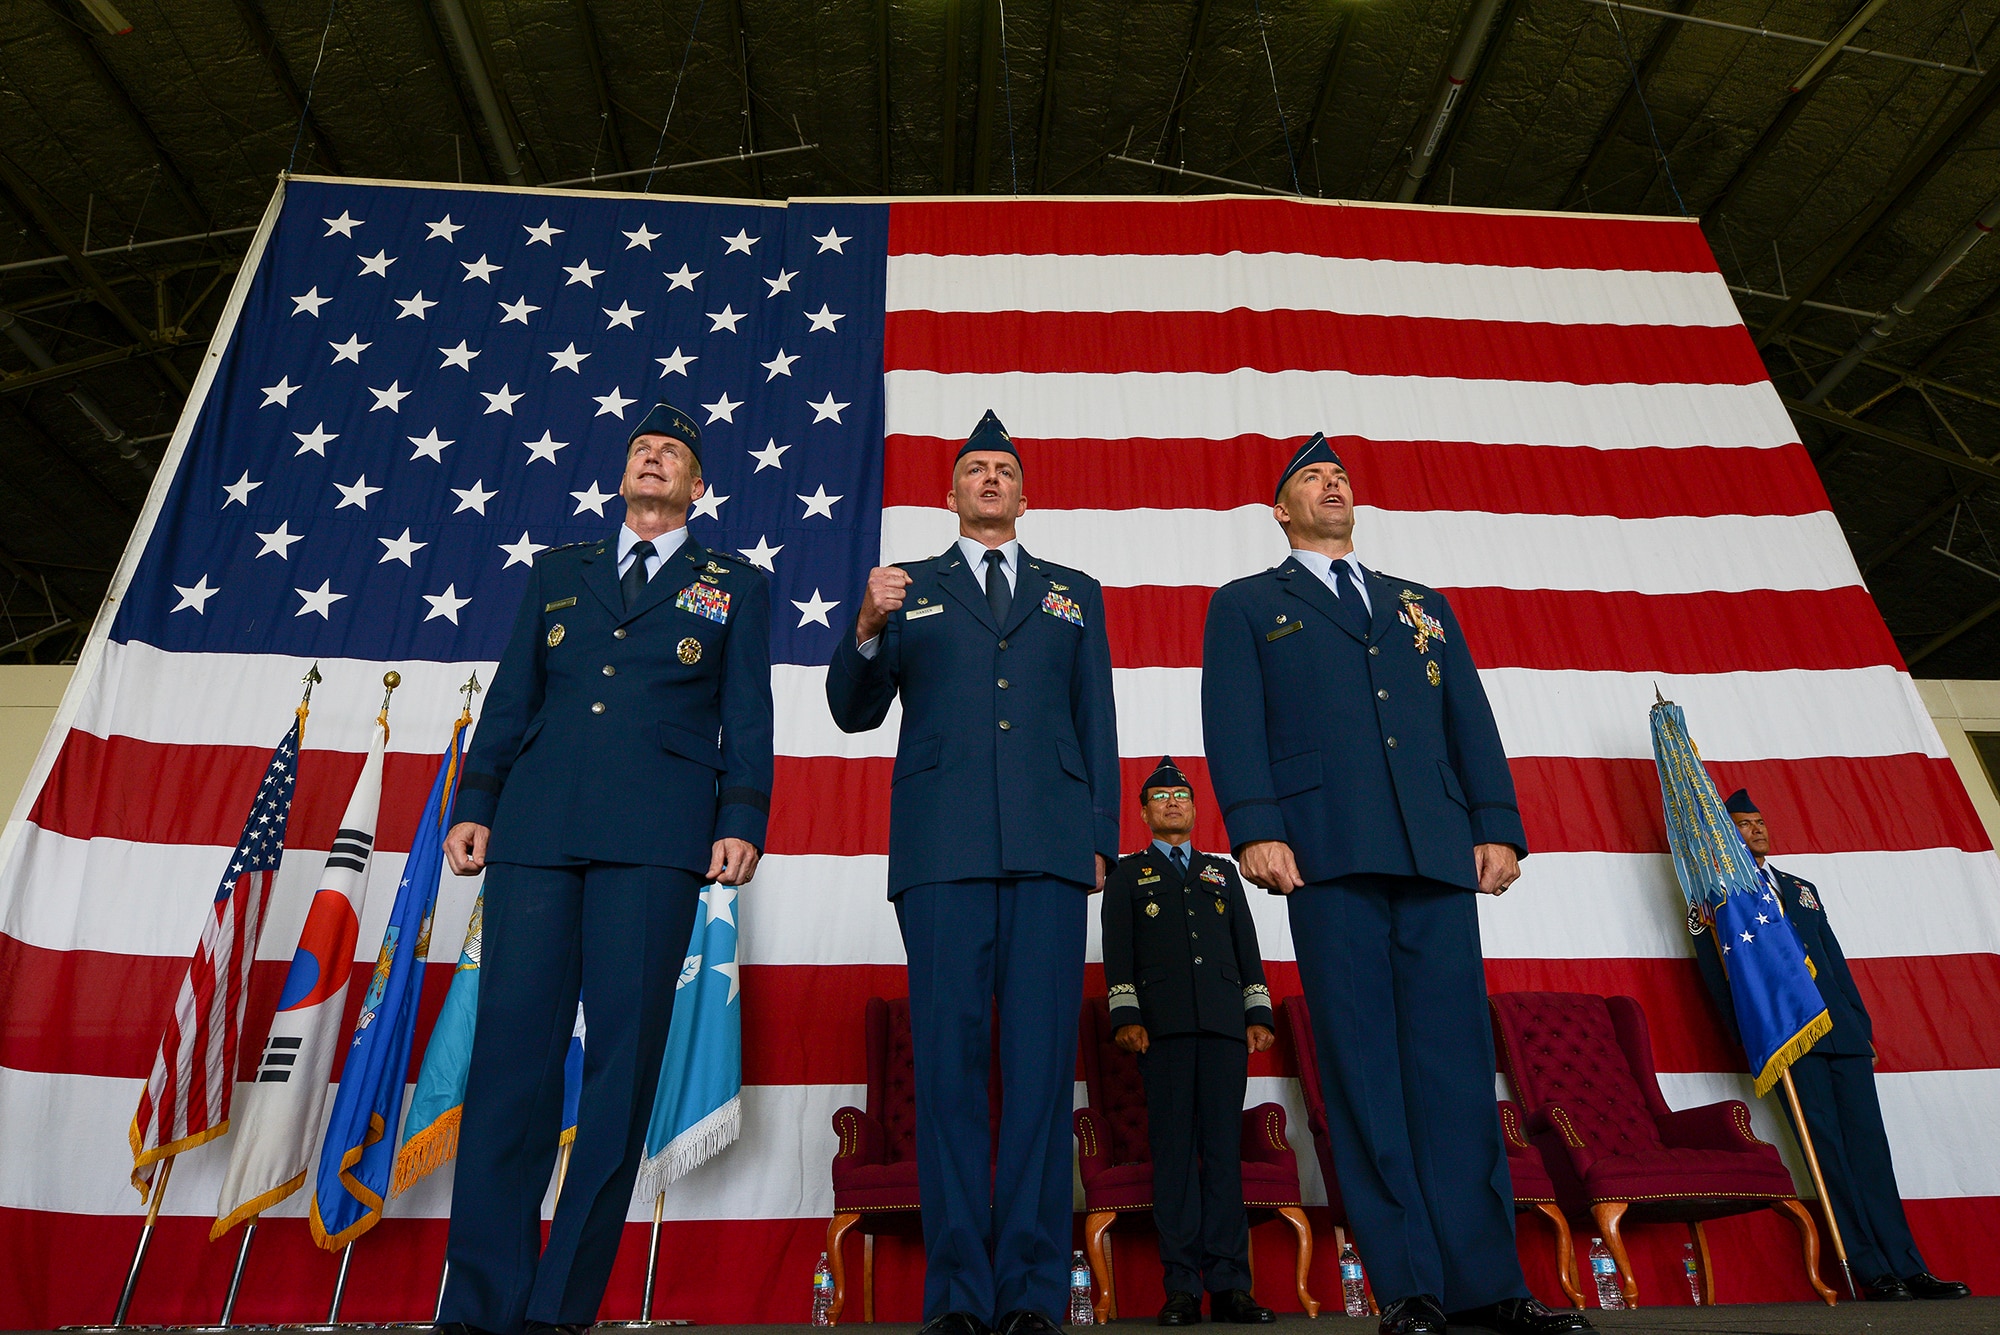 Lt. Gen. Terrence O'Shaughnessy, 7th Air Force commander, Col. Andrew Hansen, incoming 51st Fighter Wing commander, and Col. Brook Leonard, outgoing 51st Fighter Wing commander, sing the Air Force song at the end of the 51st FW change of command ceremony June 16, 2015, at Osan Air Base, Republic of Korea. The ceremony signified the passing of authority in the 51st FW. (U.S. Air Force photo by Staff Sgt. Jake Barreiro/Released)